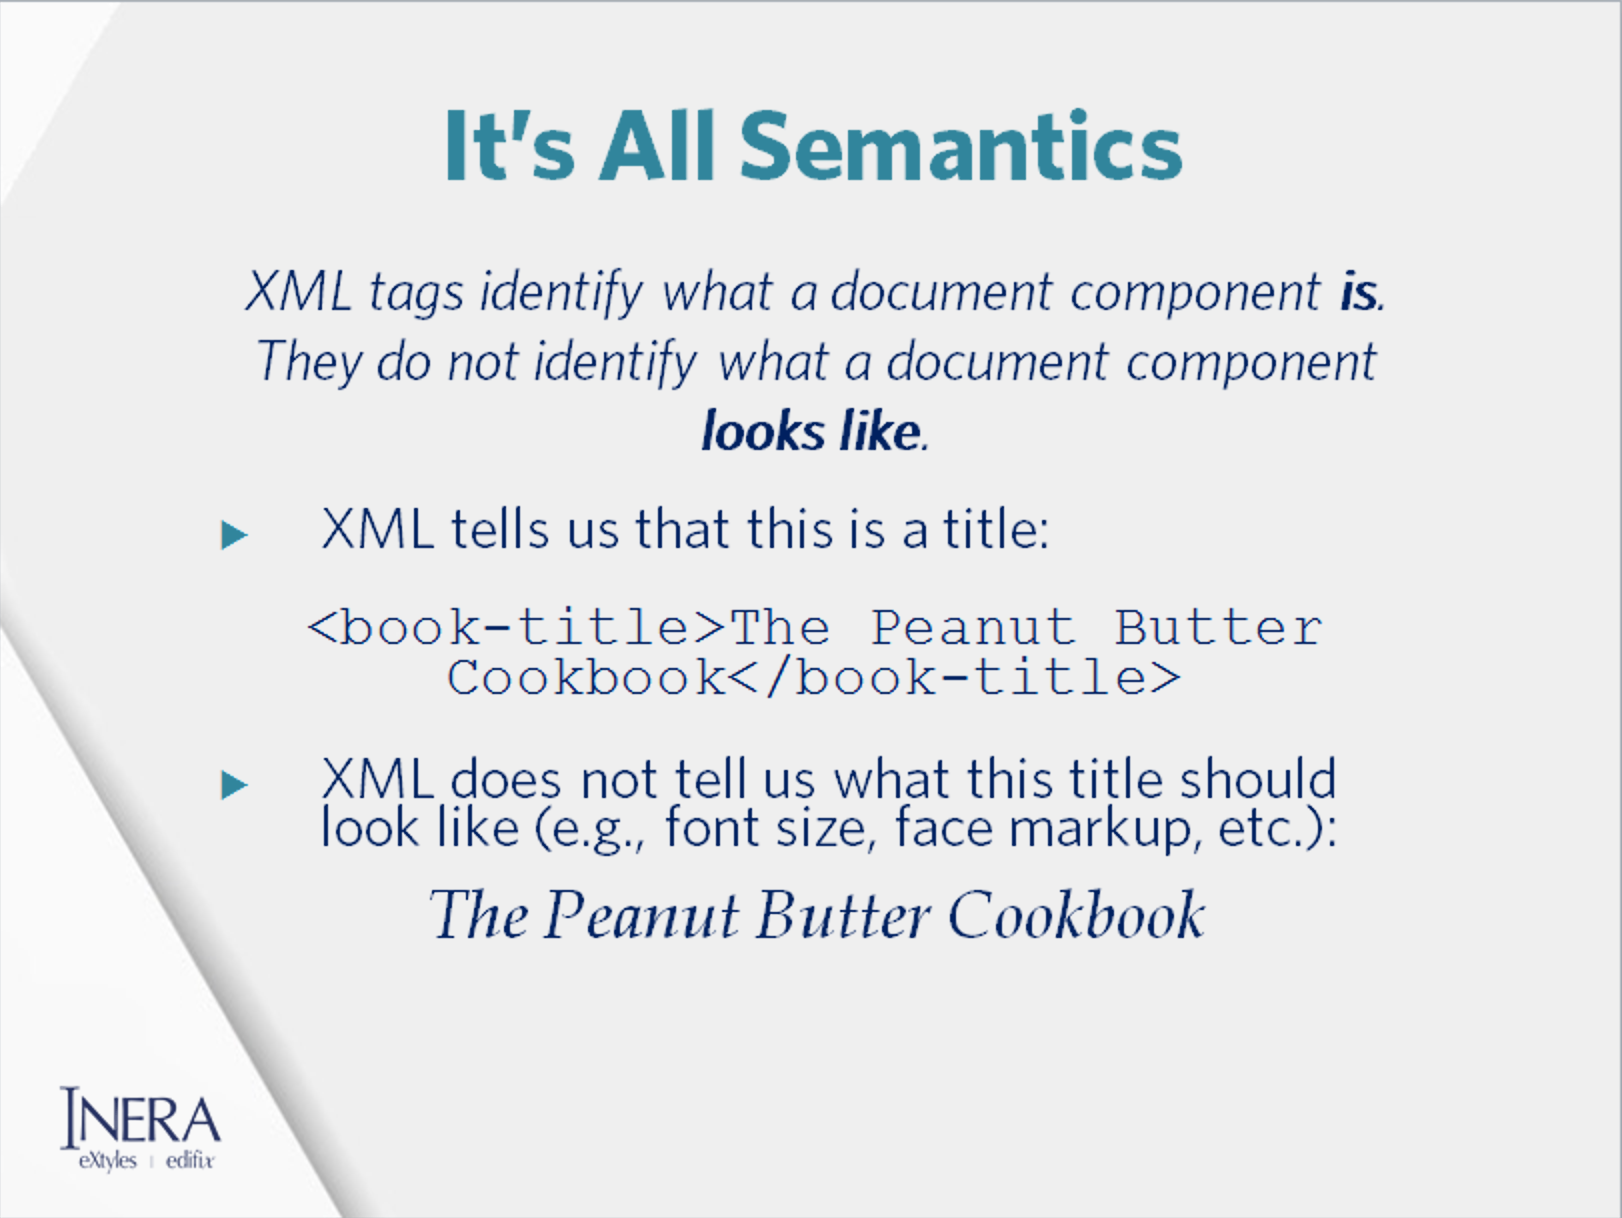 slide titled It's All Semantics, showing a book title tagged as book_title and the same book title with italic formatting